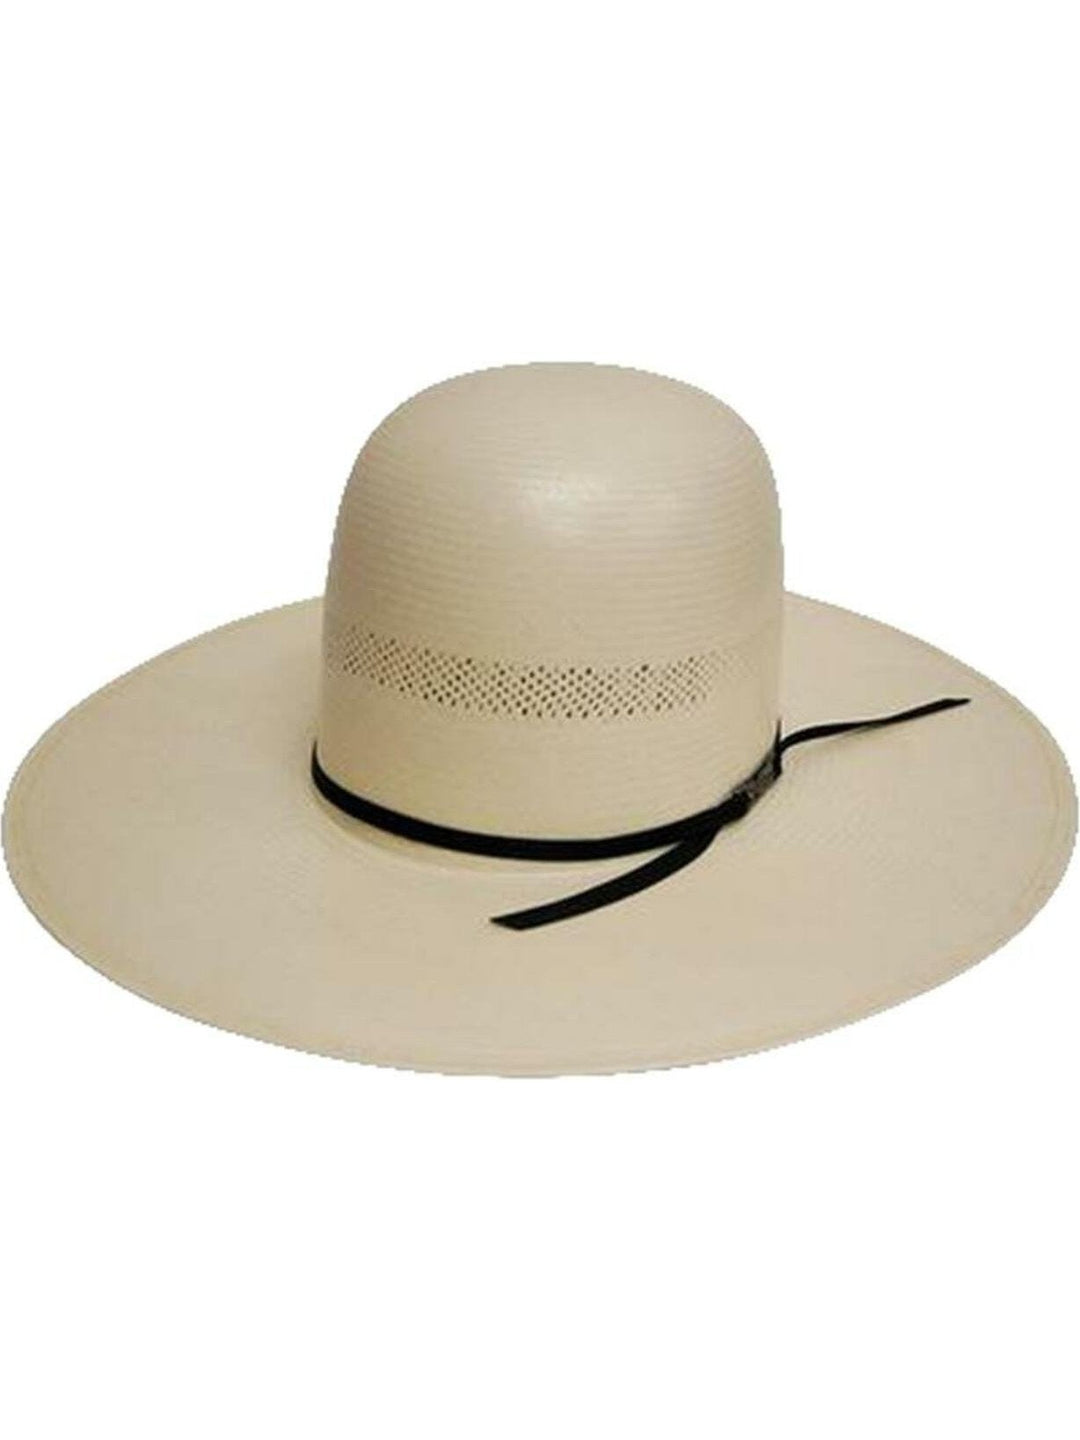 AMERICAN HAT CO 20X 7104 STRAW HAT - J&R Tack & Feed CO